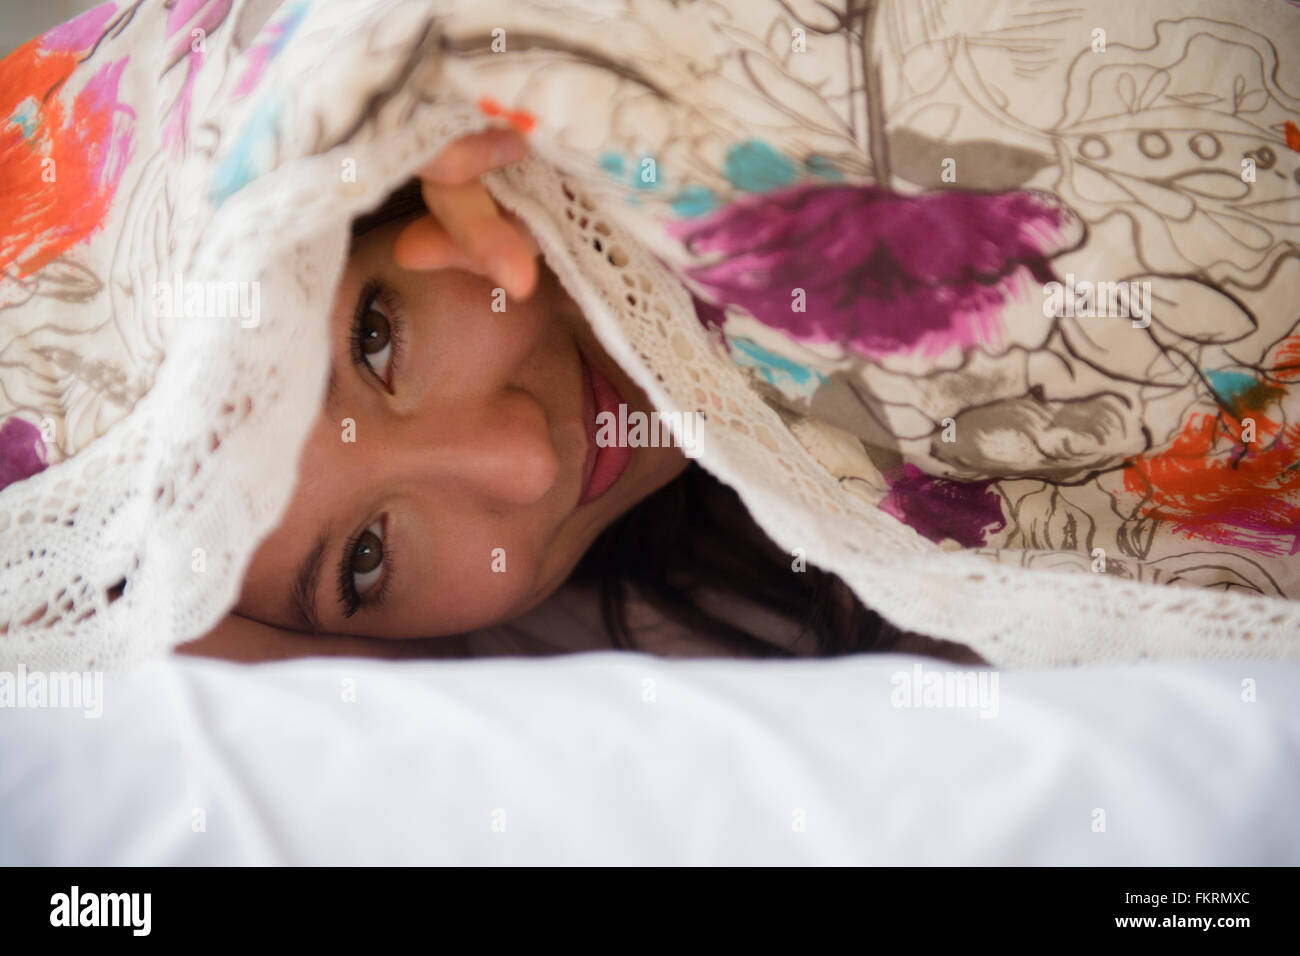 Mixed Race woman peeking out from blanket Banque D'Images